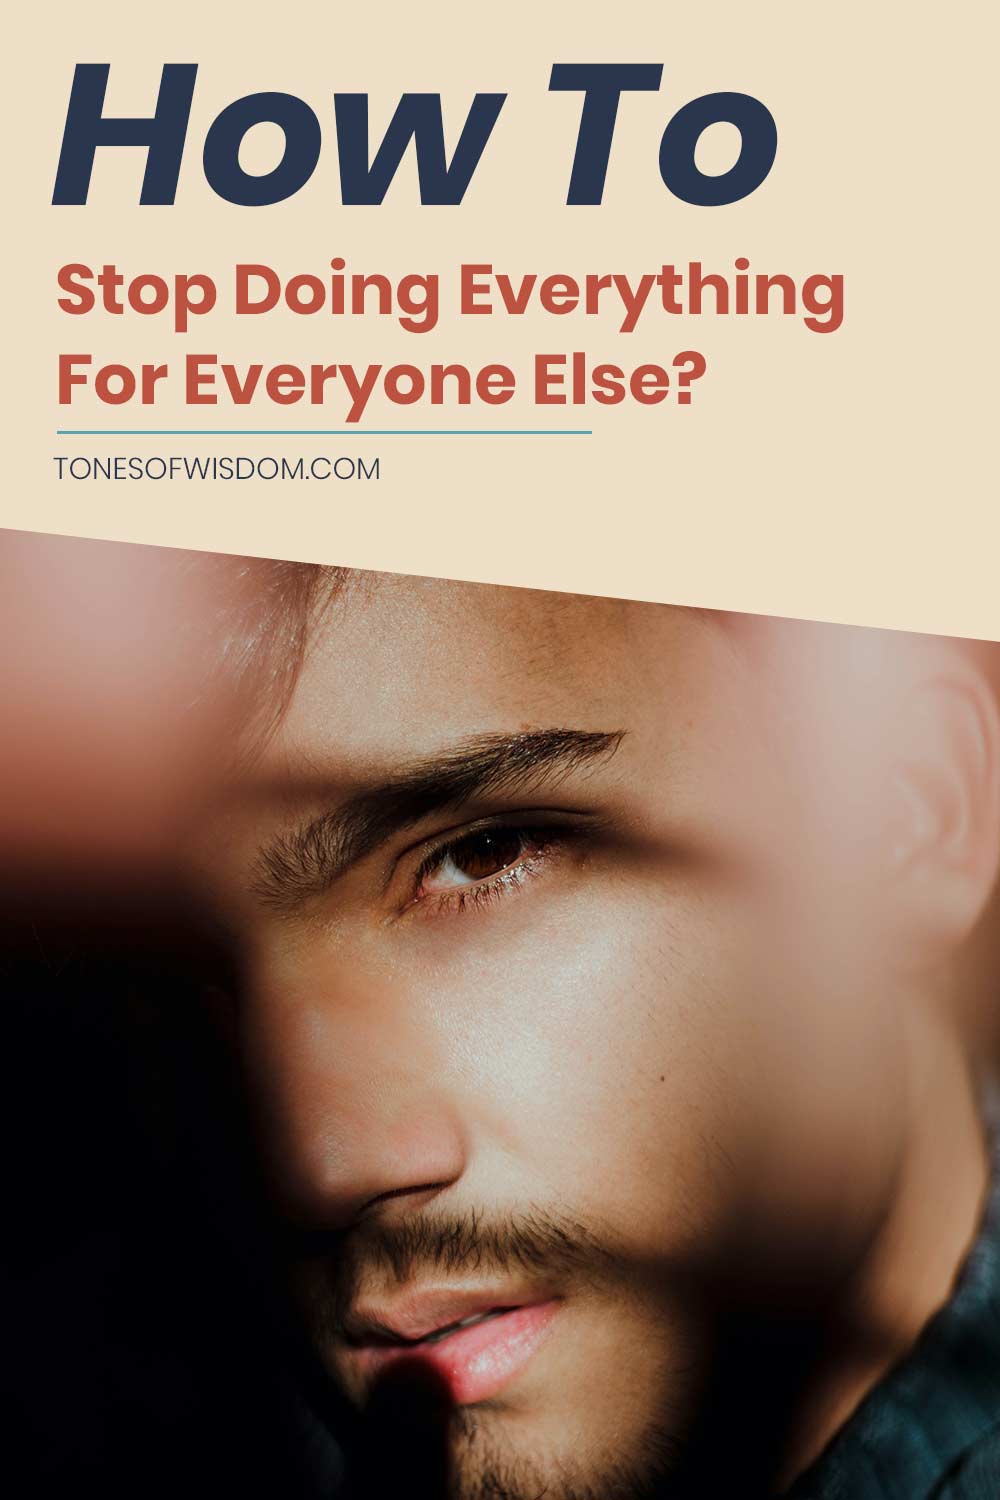 How To Stop Doing Everything For Everyone Else?